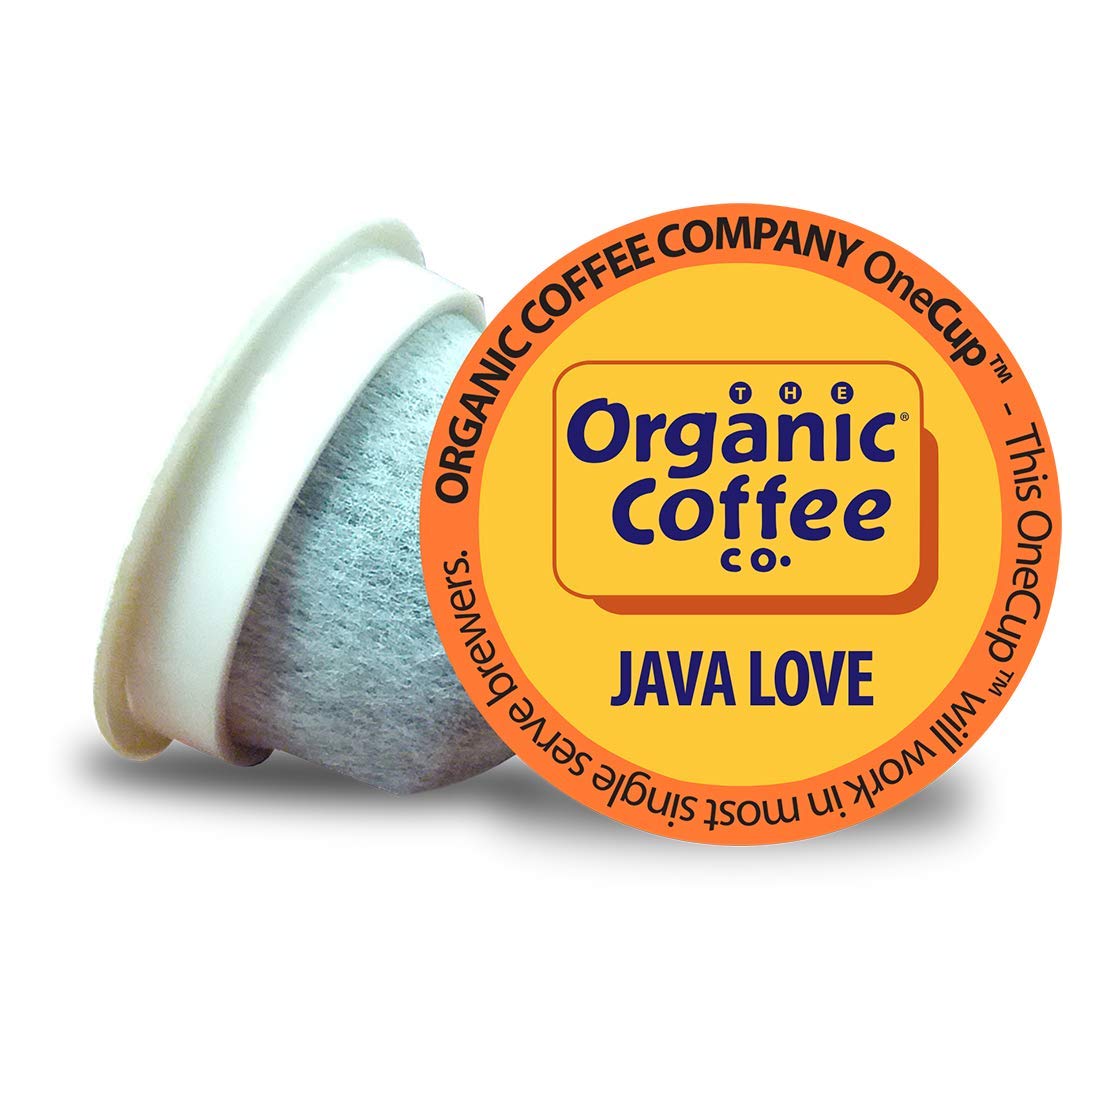 The Organic Coffee Co. Compostable Coffee Pods - Java Love (80 Ct) K Cup Compatible including Keurig 2.0, Medium Roast, USDA Organic